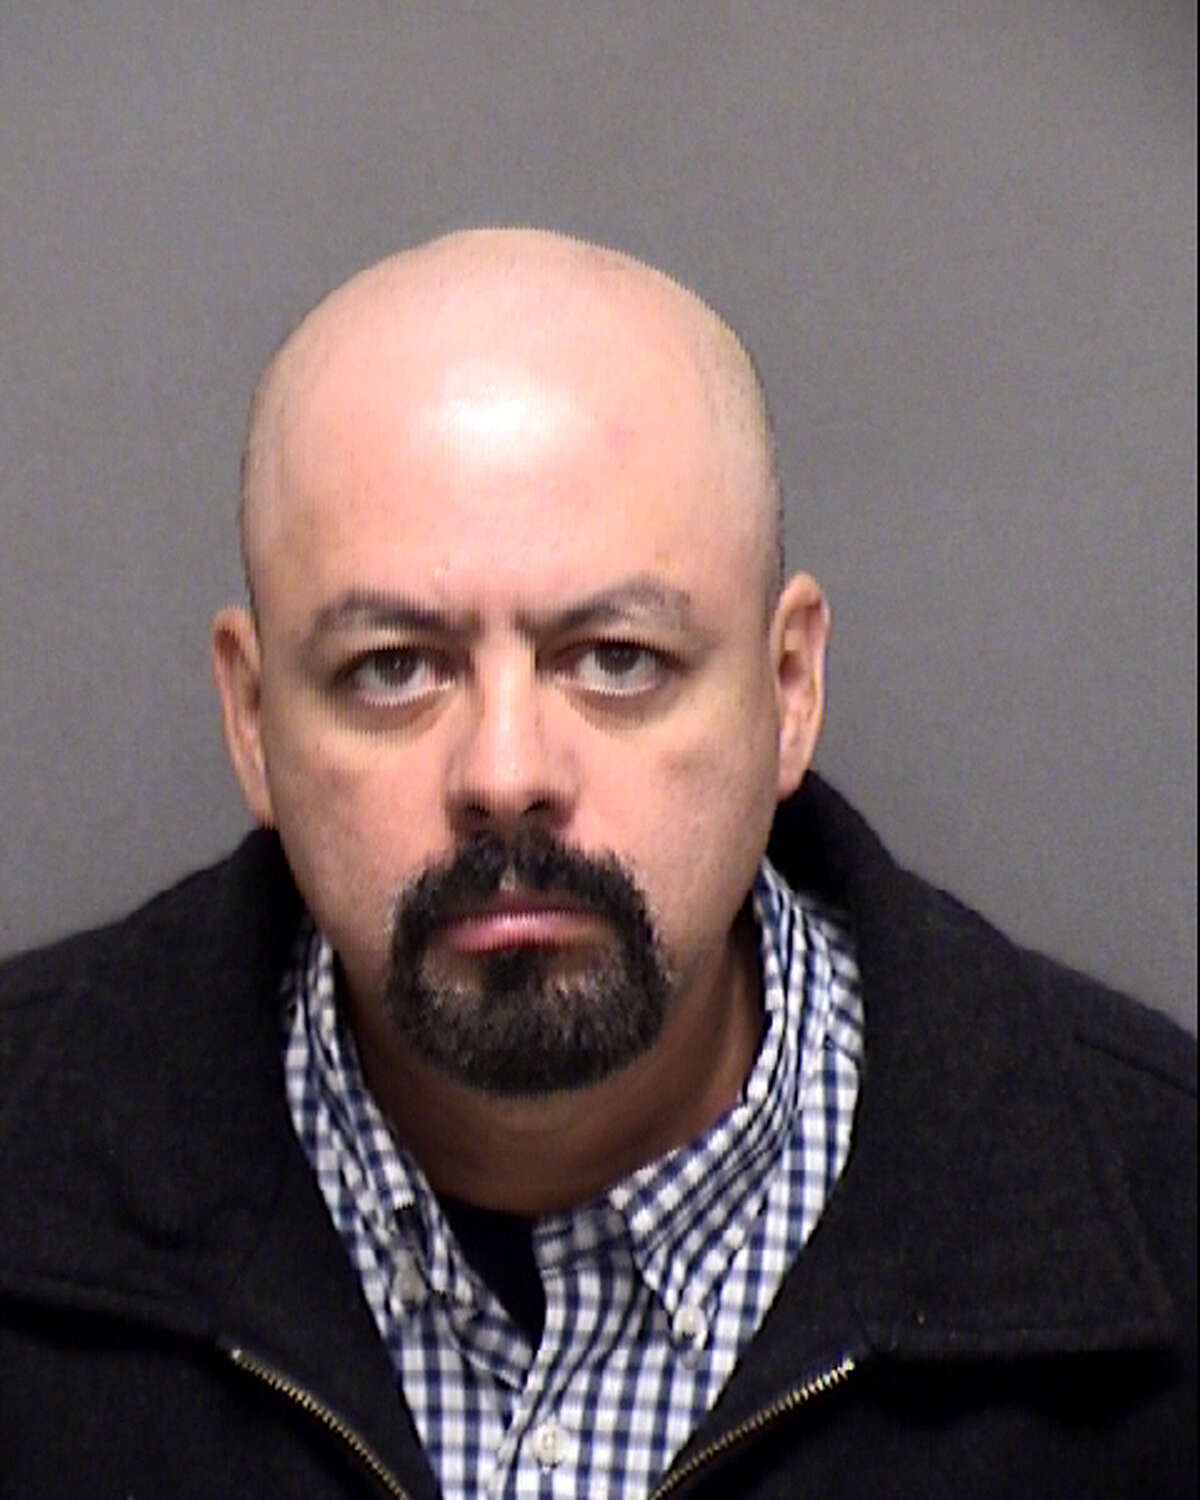 Roland Cortez was indicted for indecency with a child on May 29, 2019.